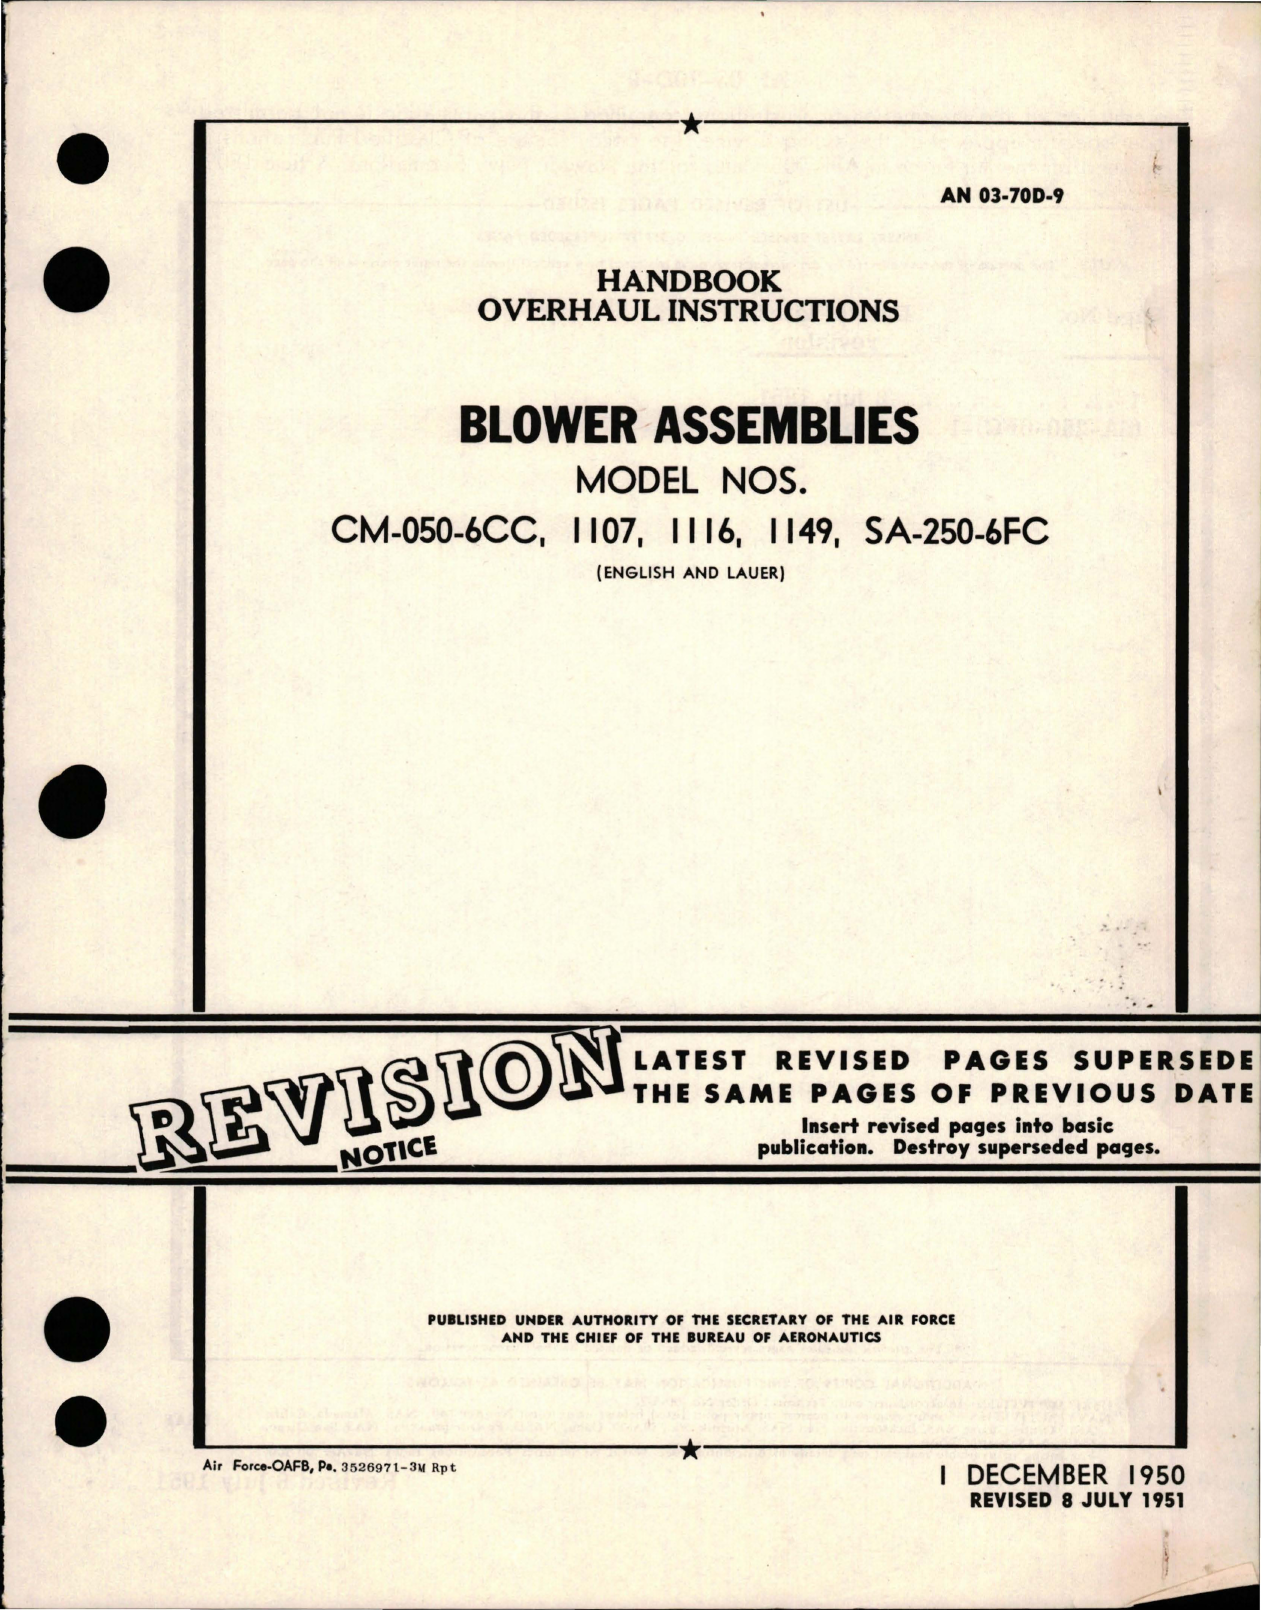 Sample page 1 from AirCorps Library document: Overhaul Instructions for Blower Assemblies - Models CM-050-6CC, 1107, 1116, 1149, and SA-250-6FC